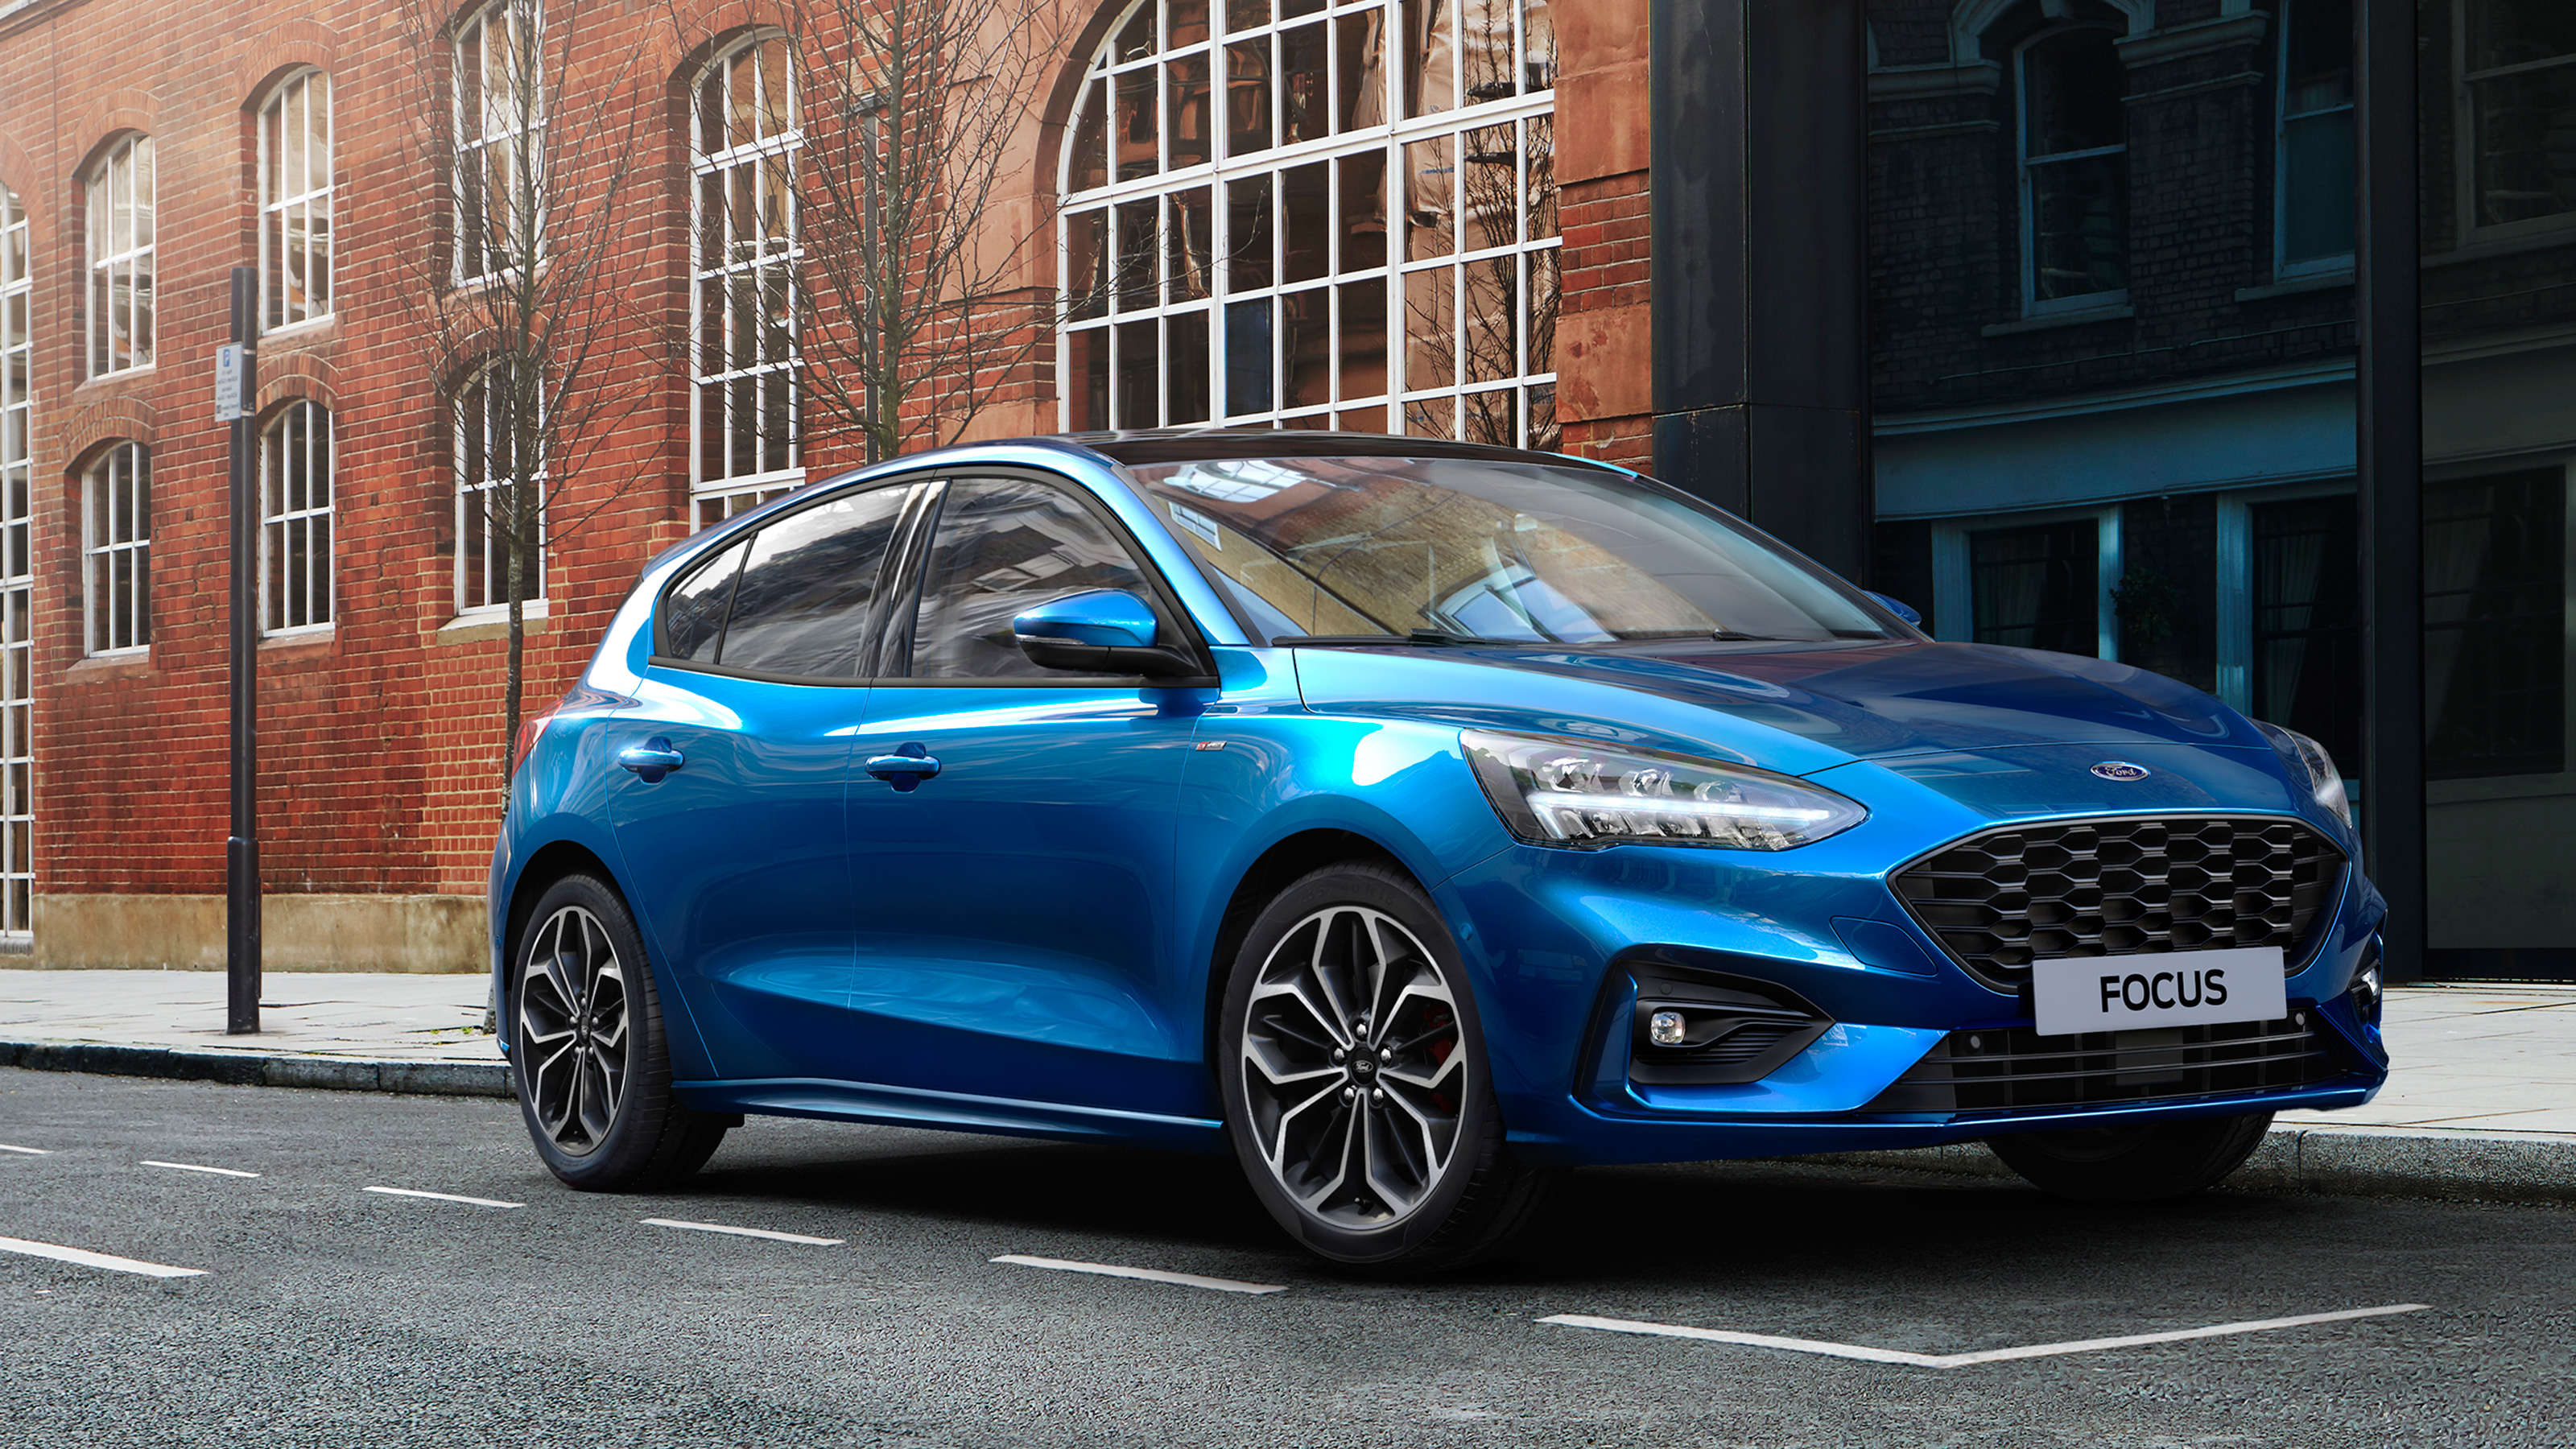 New Ford Focus Ecoboost Hybrid engines arrive with Zetec 